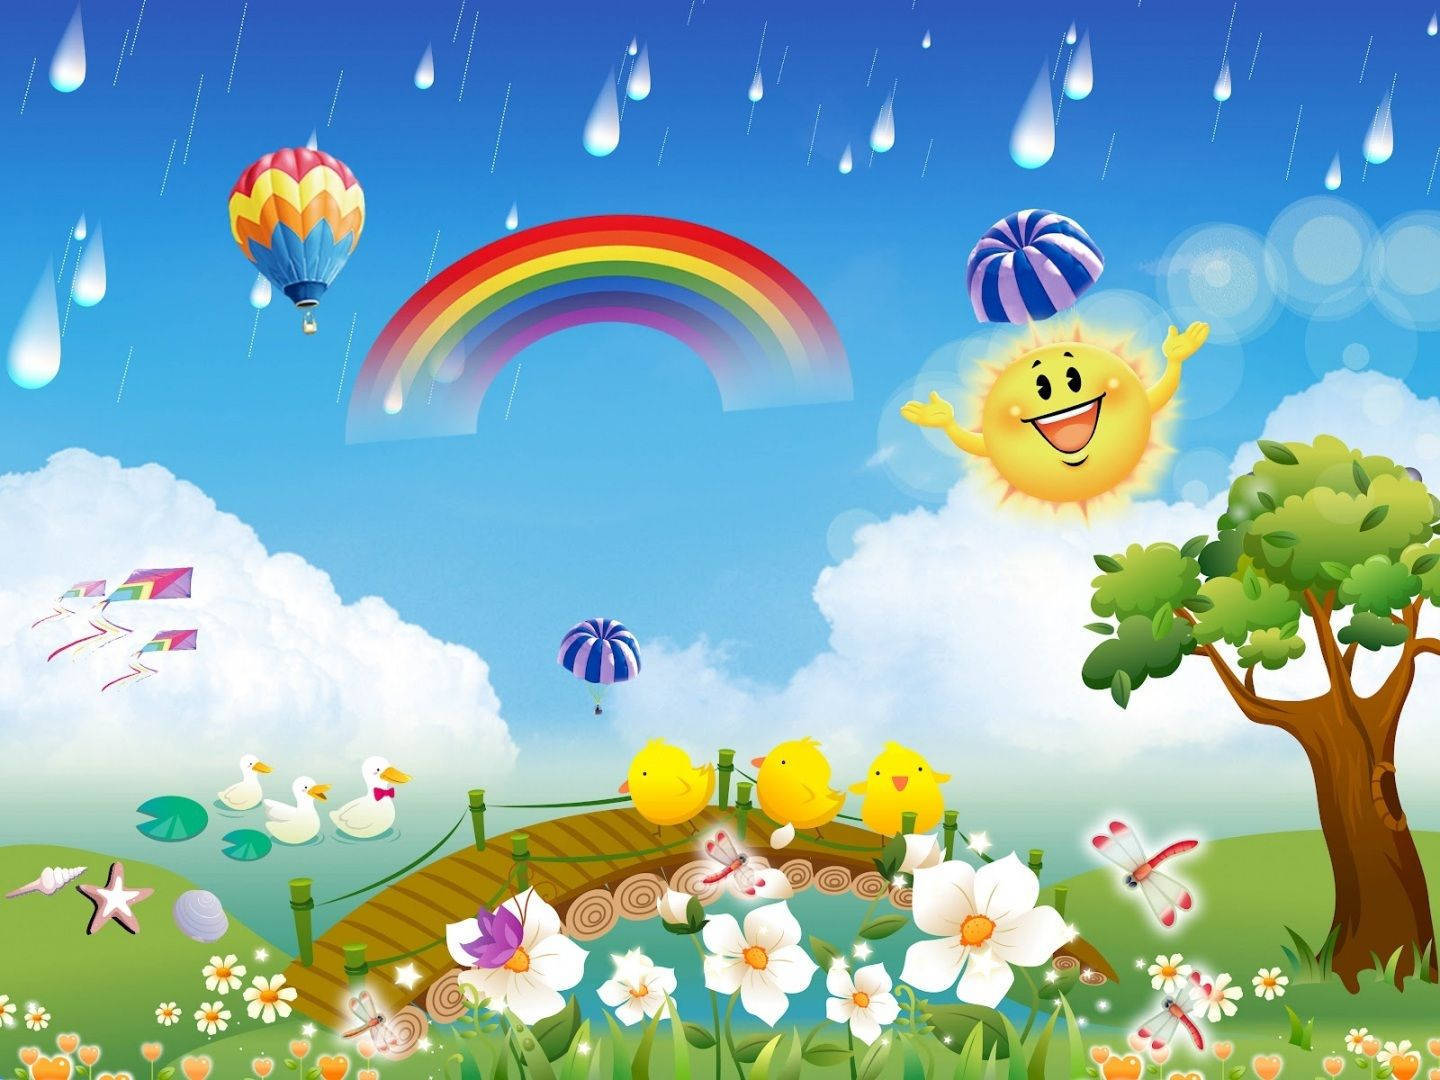 Cute Cartoon Depicting A Rainbow Picture